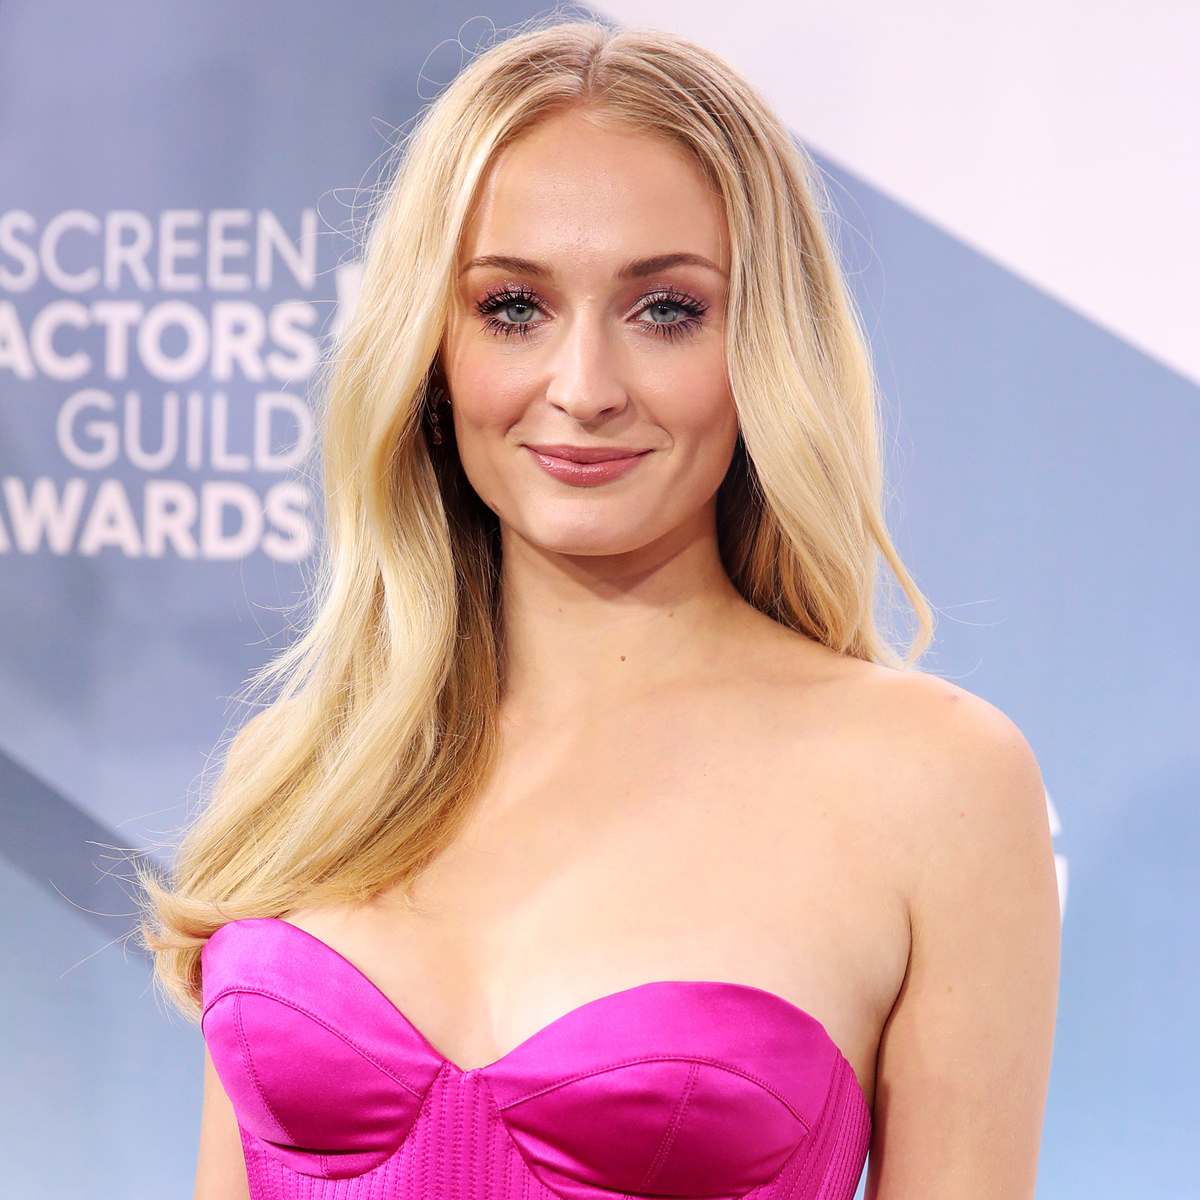 Sophie Turner has traded her signature red hair for blonde